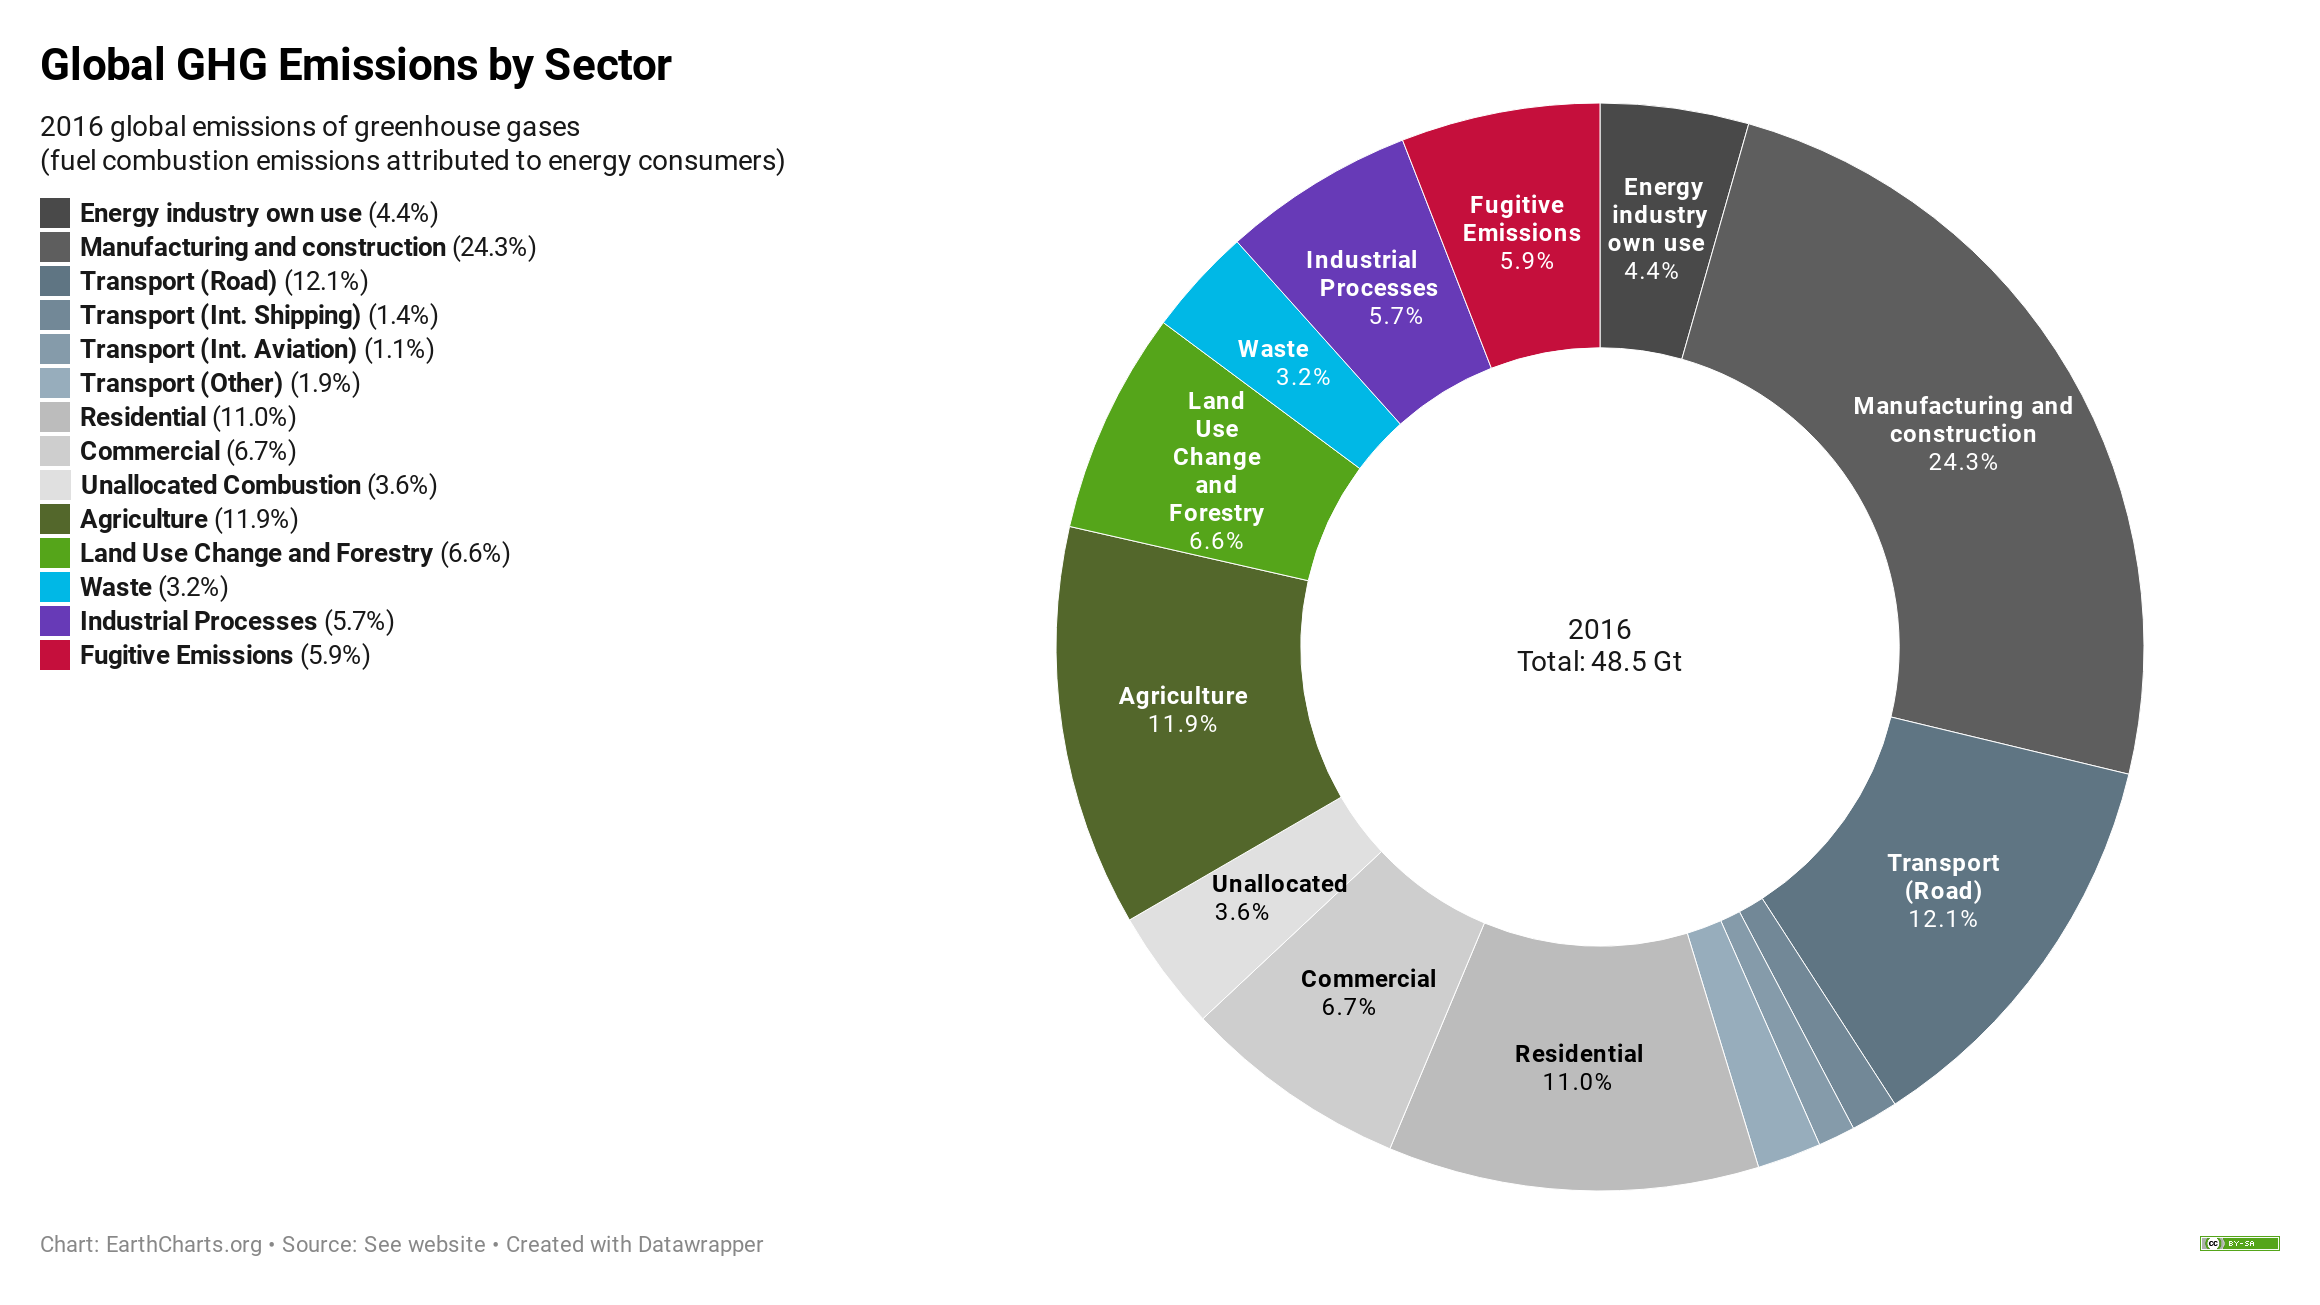 Greenhouse gas emissions by sector, World